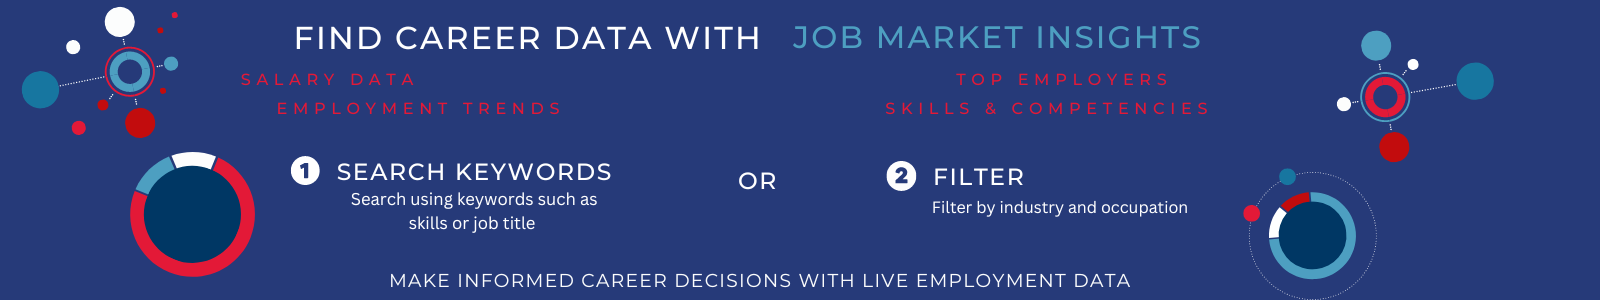 Find Career Data with Job Market Insights
- Salary Data
- Emplpoyment trends
- Top Employers
- Skills & competencies
1. search keywords- search using keywords such as skills or job title
2. filter- filter by industry and occupation

Make informed career decisions with live employment data.